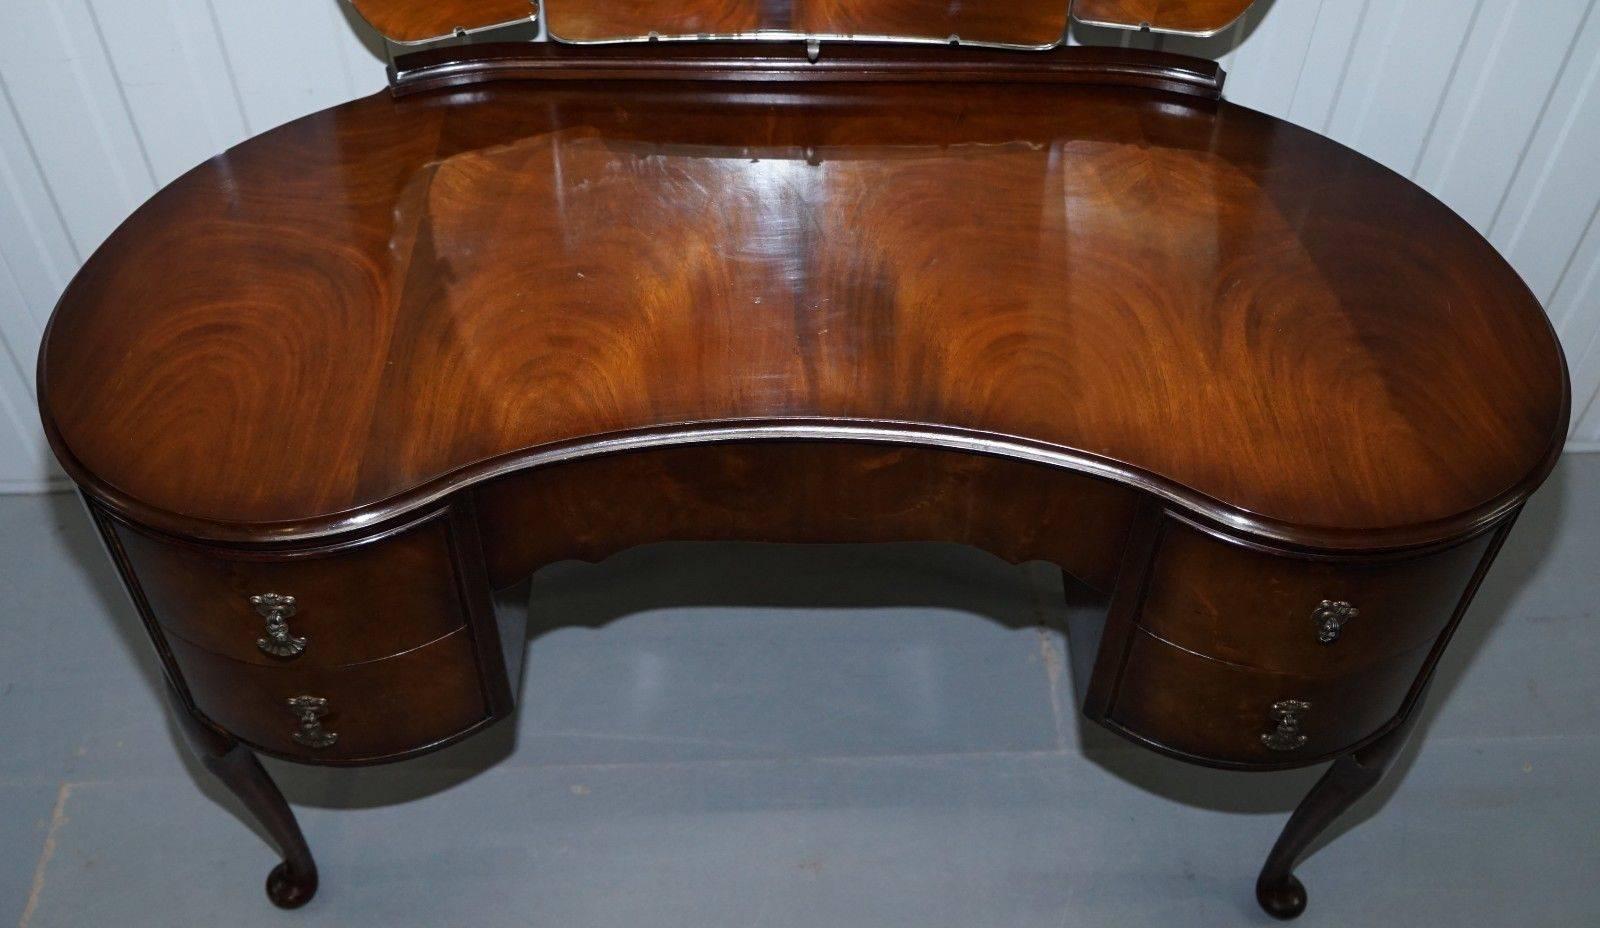 We are delighted to offer for sale this lovely, circa 1930s handmade in England Kidney shaped flamed mahogany dressing table with tri-folding mirrors

A very good looking decorative and well-made piece, this is part of a suite, I have a matching